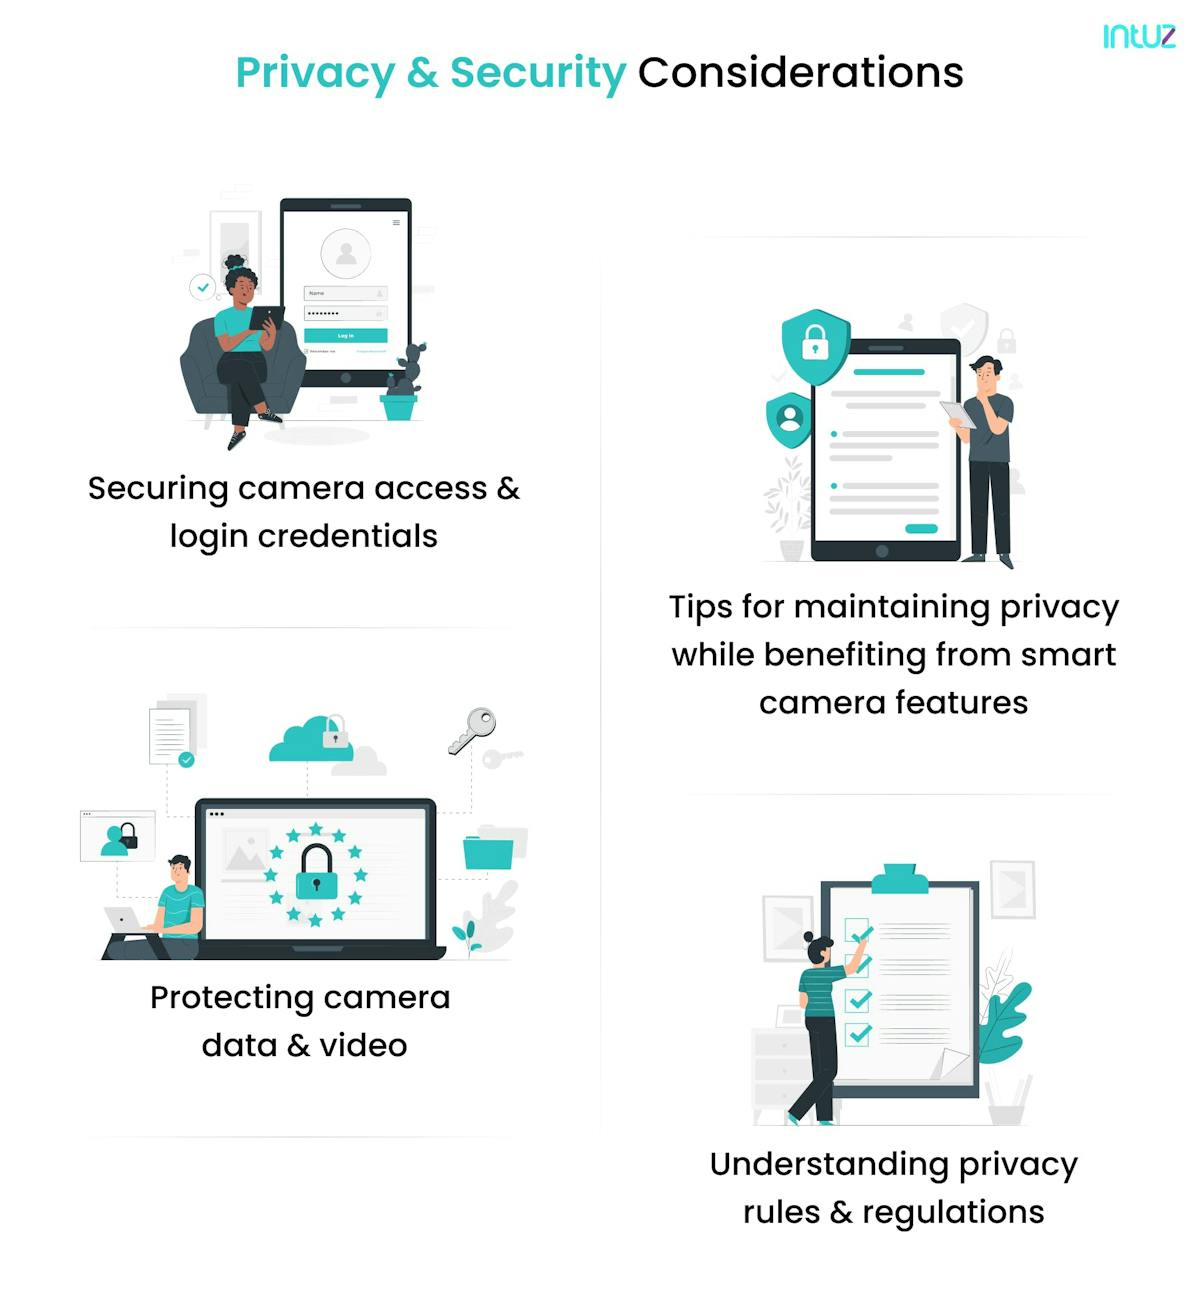 Privacy and security considerations